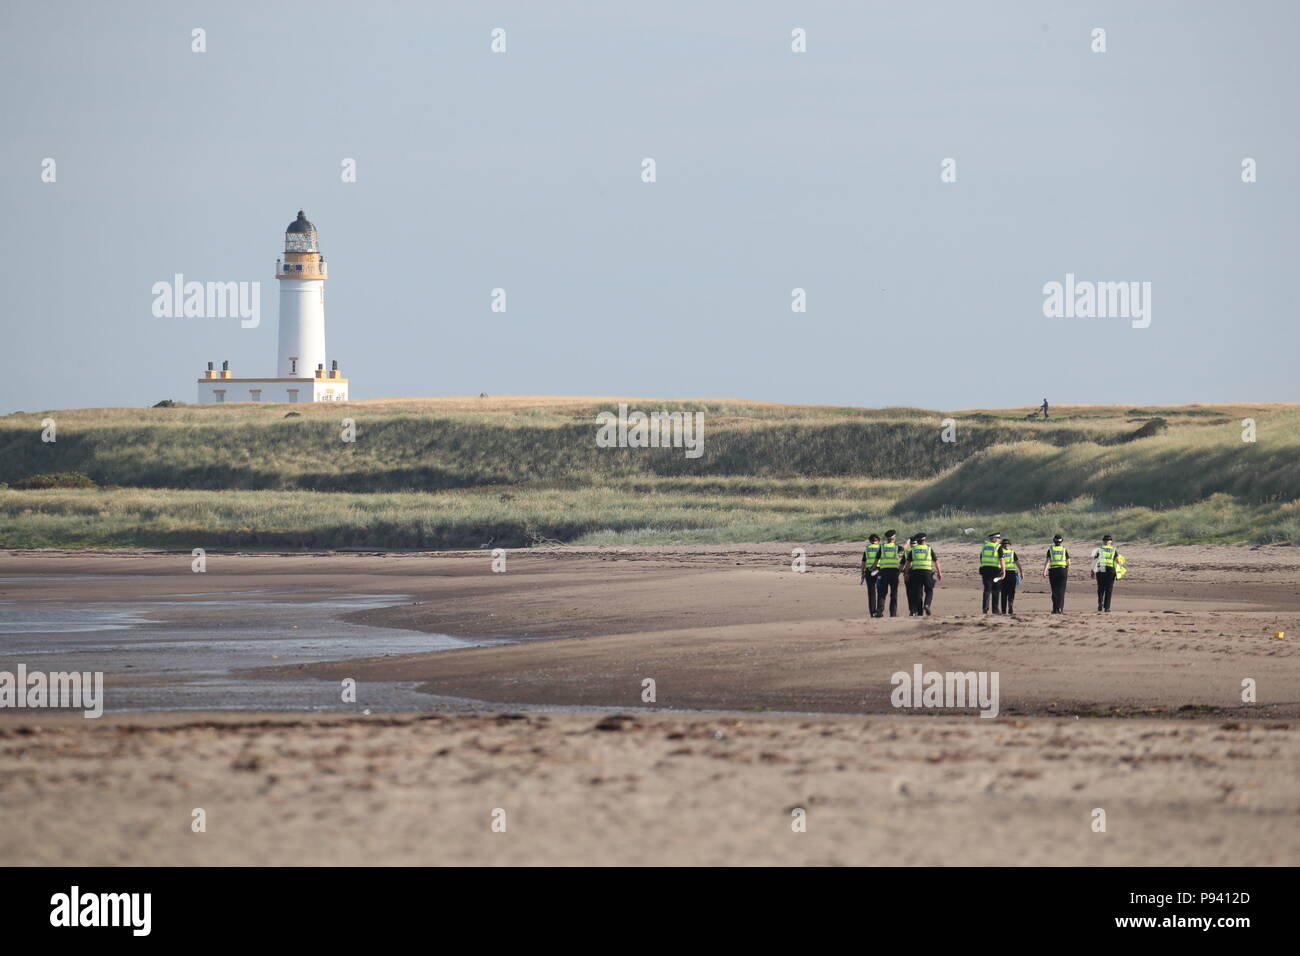 Police patrol the beach at the Trump Turnberry resort in South Ayrshire, where US President Donald Trump and first lady Melania Trump are spending the weekend. Stock Photo